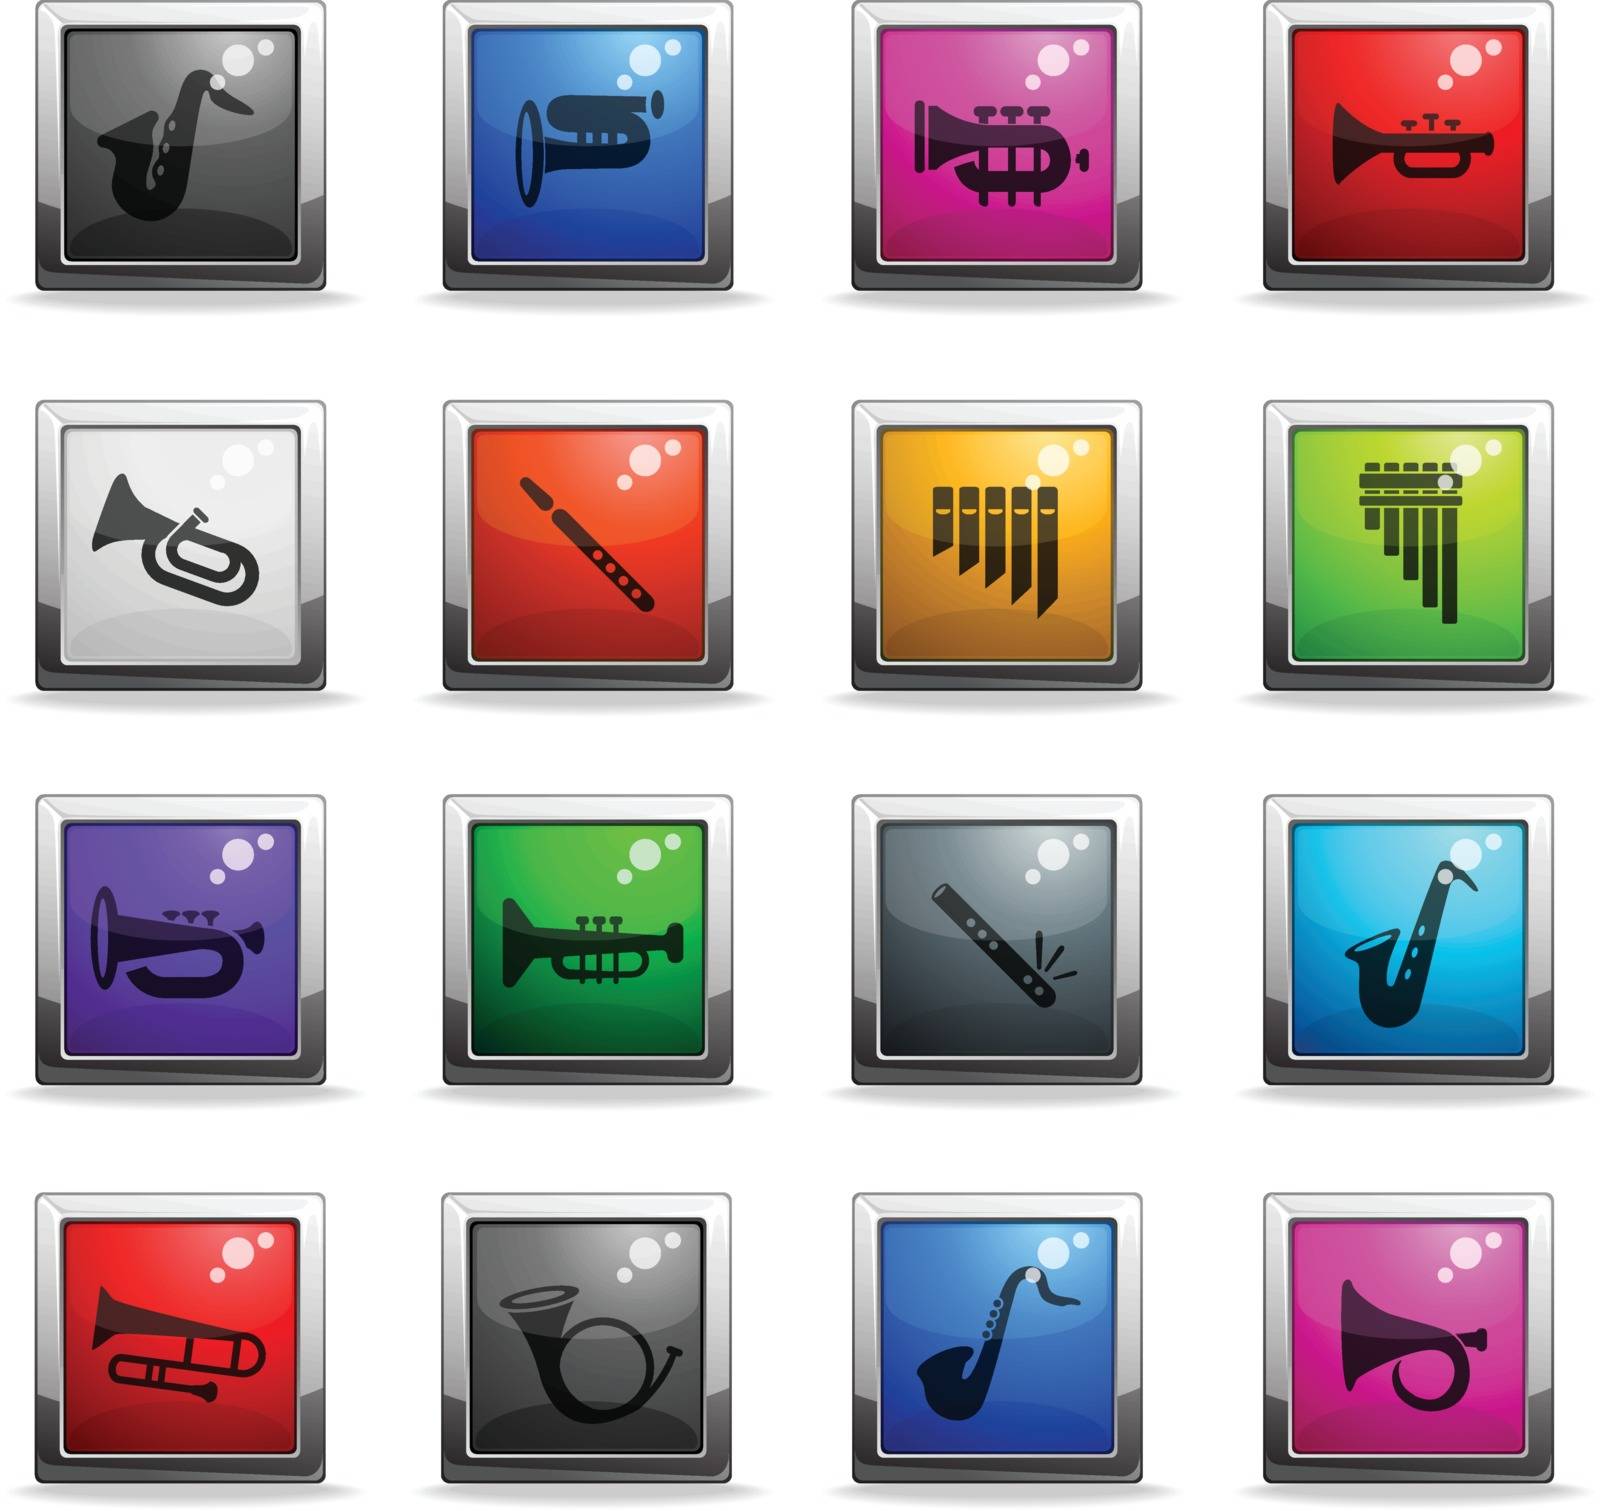 wind instruments web icons in square colored buttons for user interface design